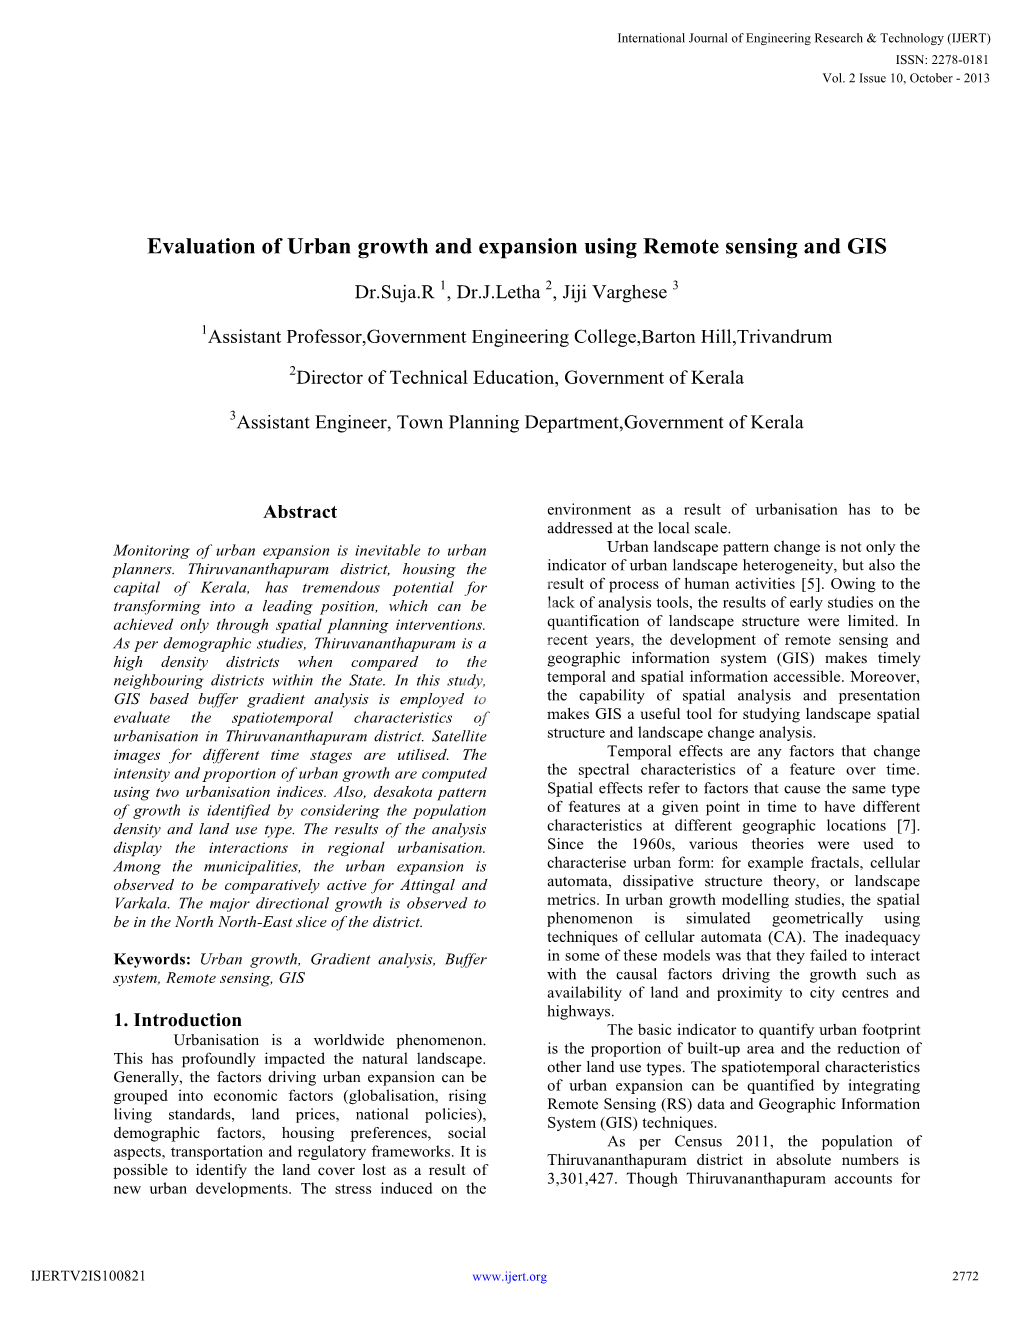 Evaluation of Urban Growth and Expansion Using Remote Sensing and GIS